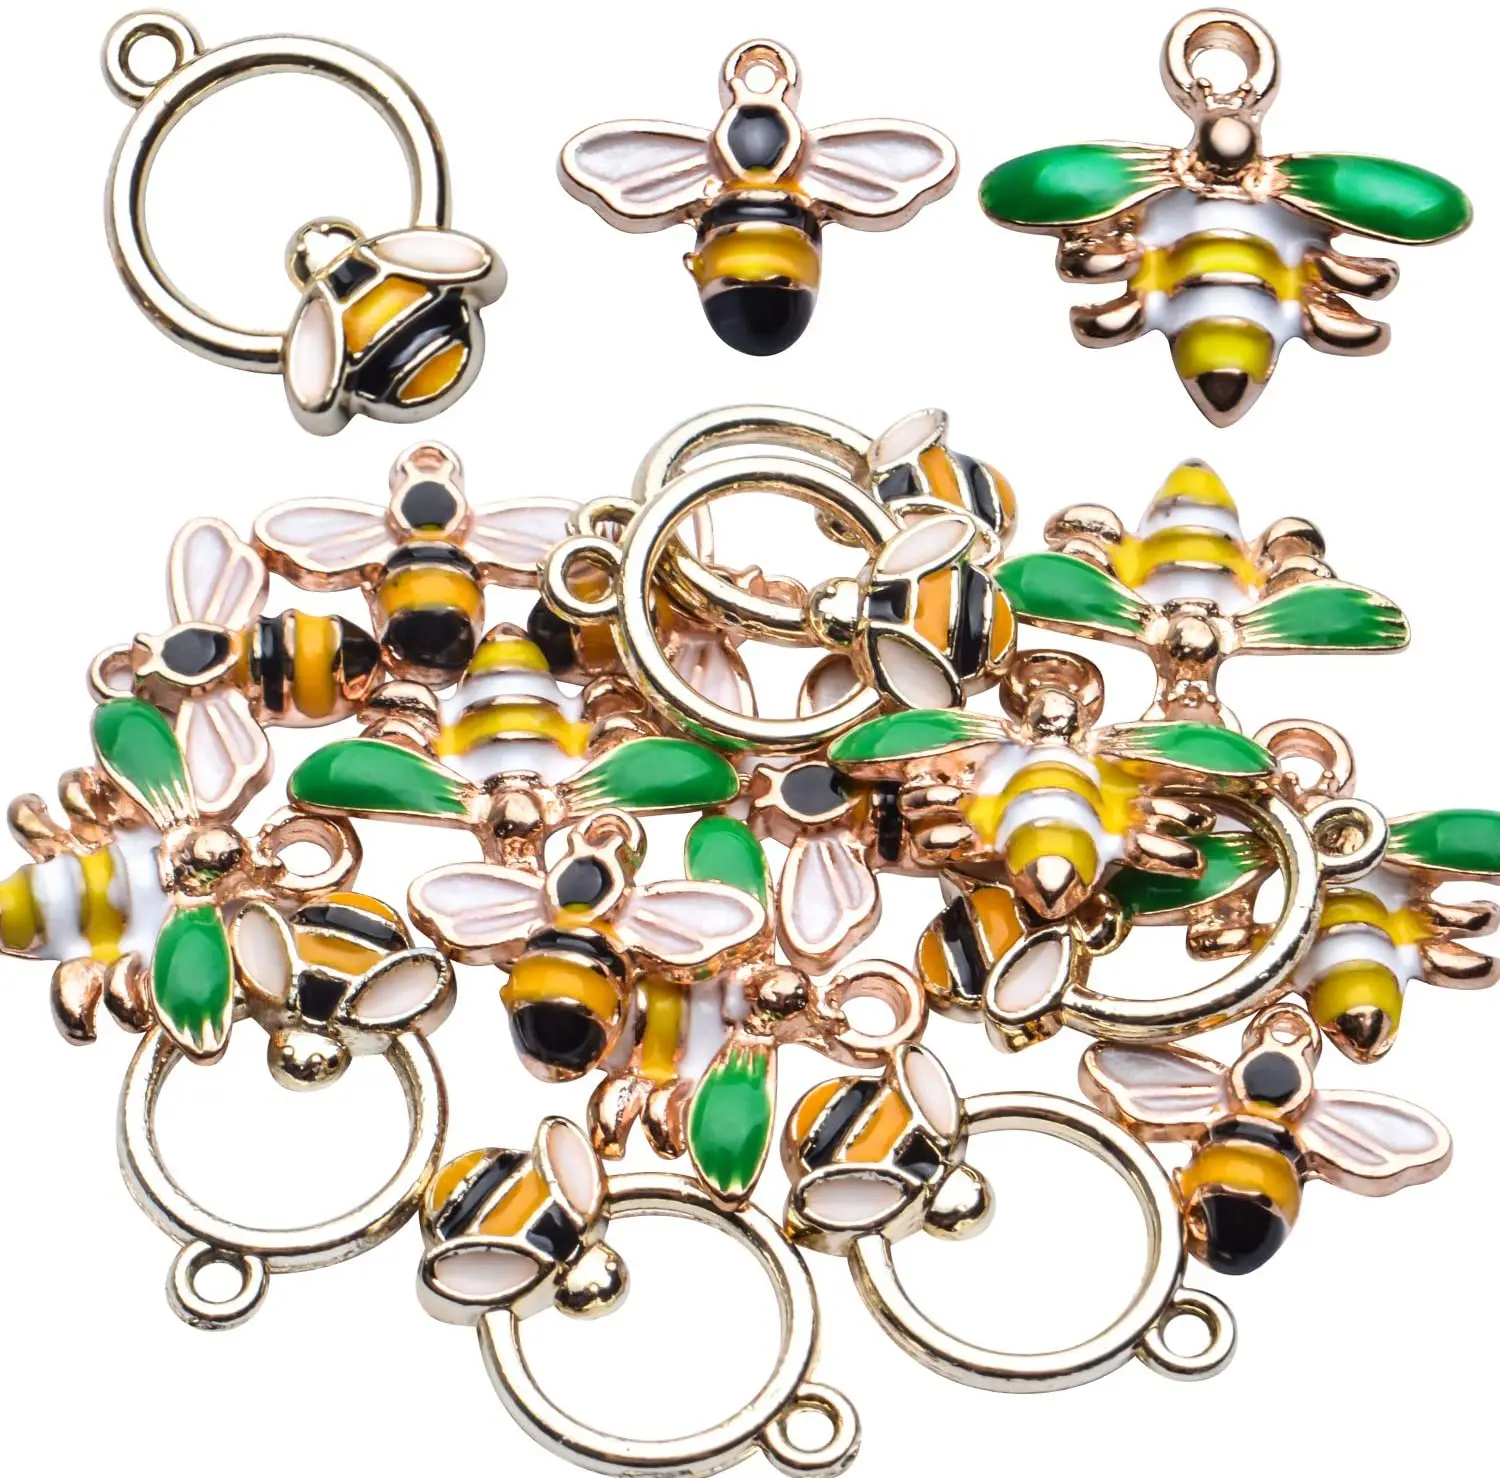 Enamel Alloy Bee Necklace Choker Pendant Insect Jewelry For Women Charms Gifts 